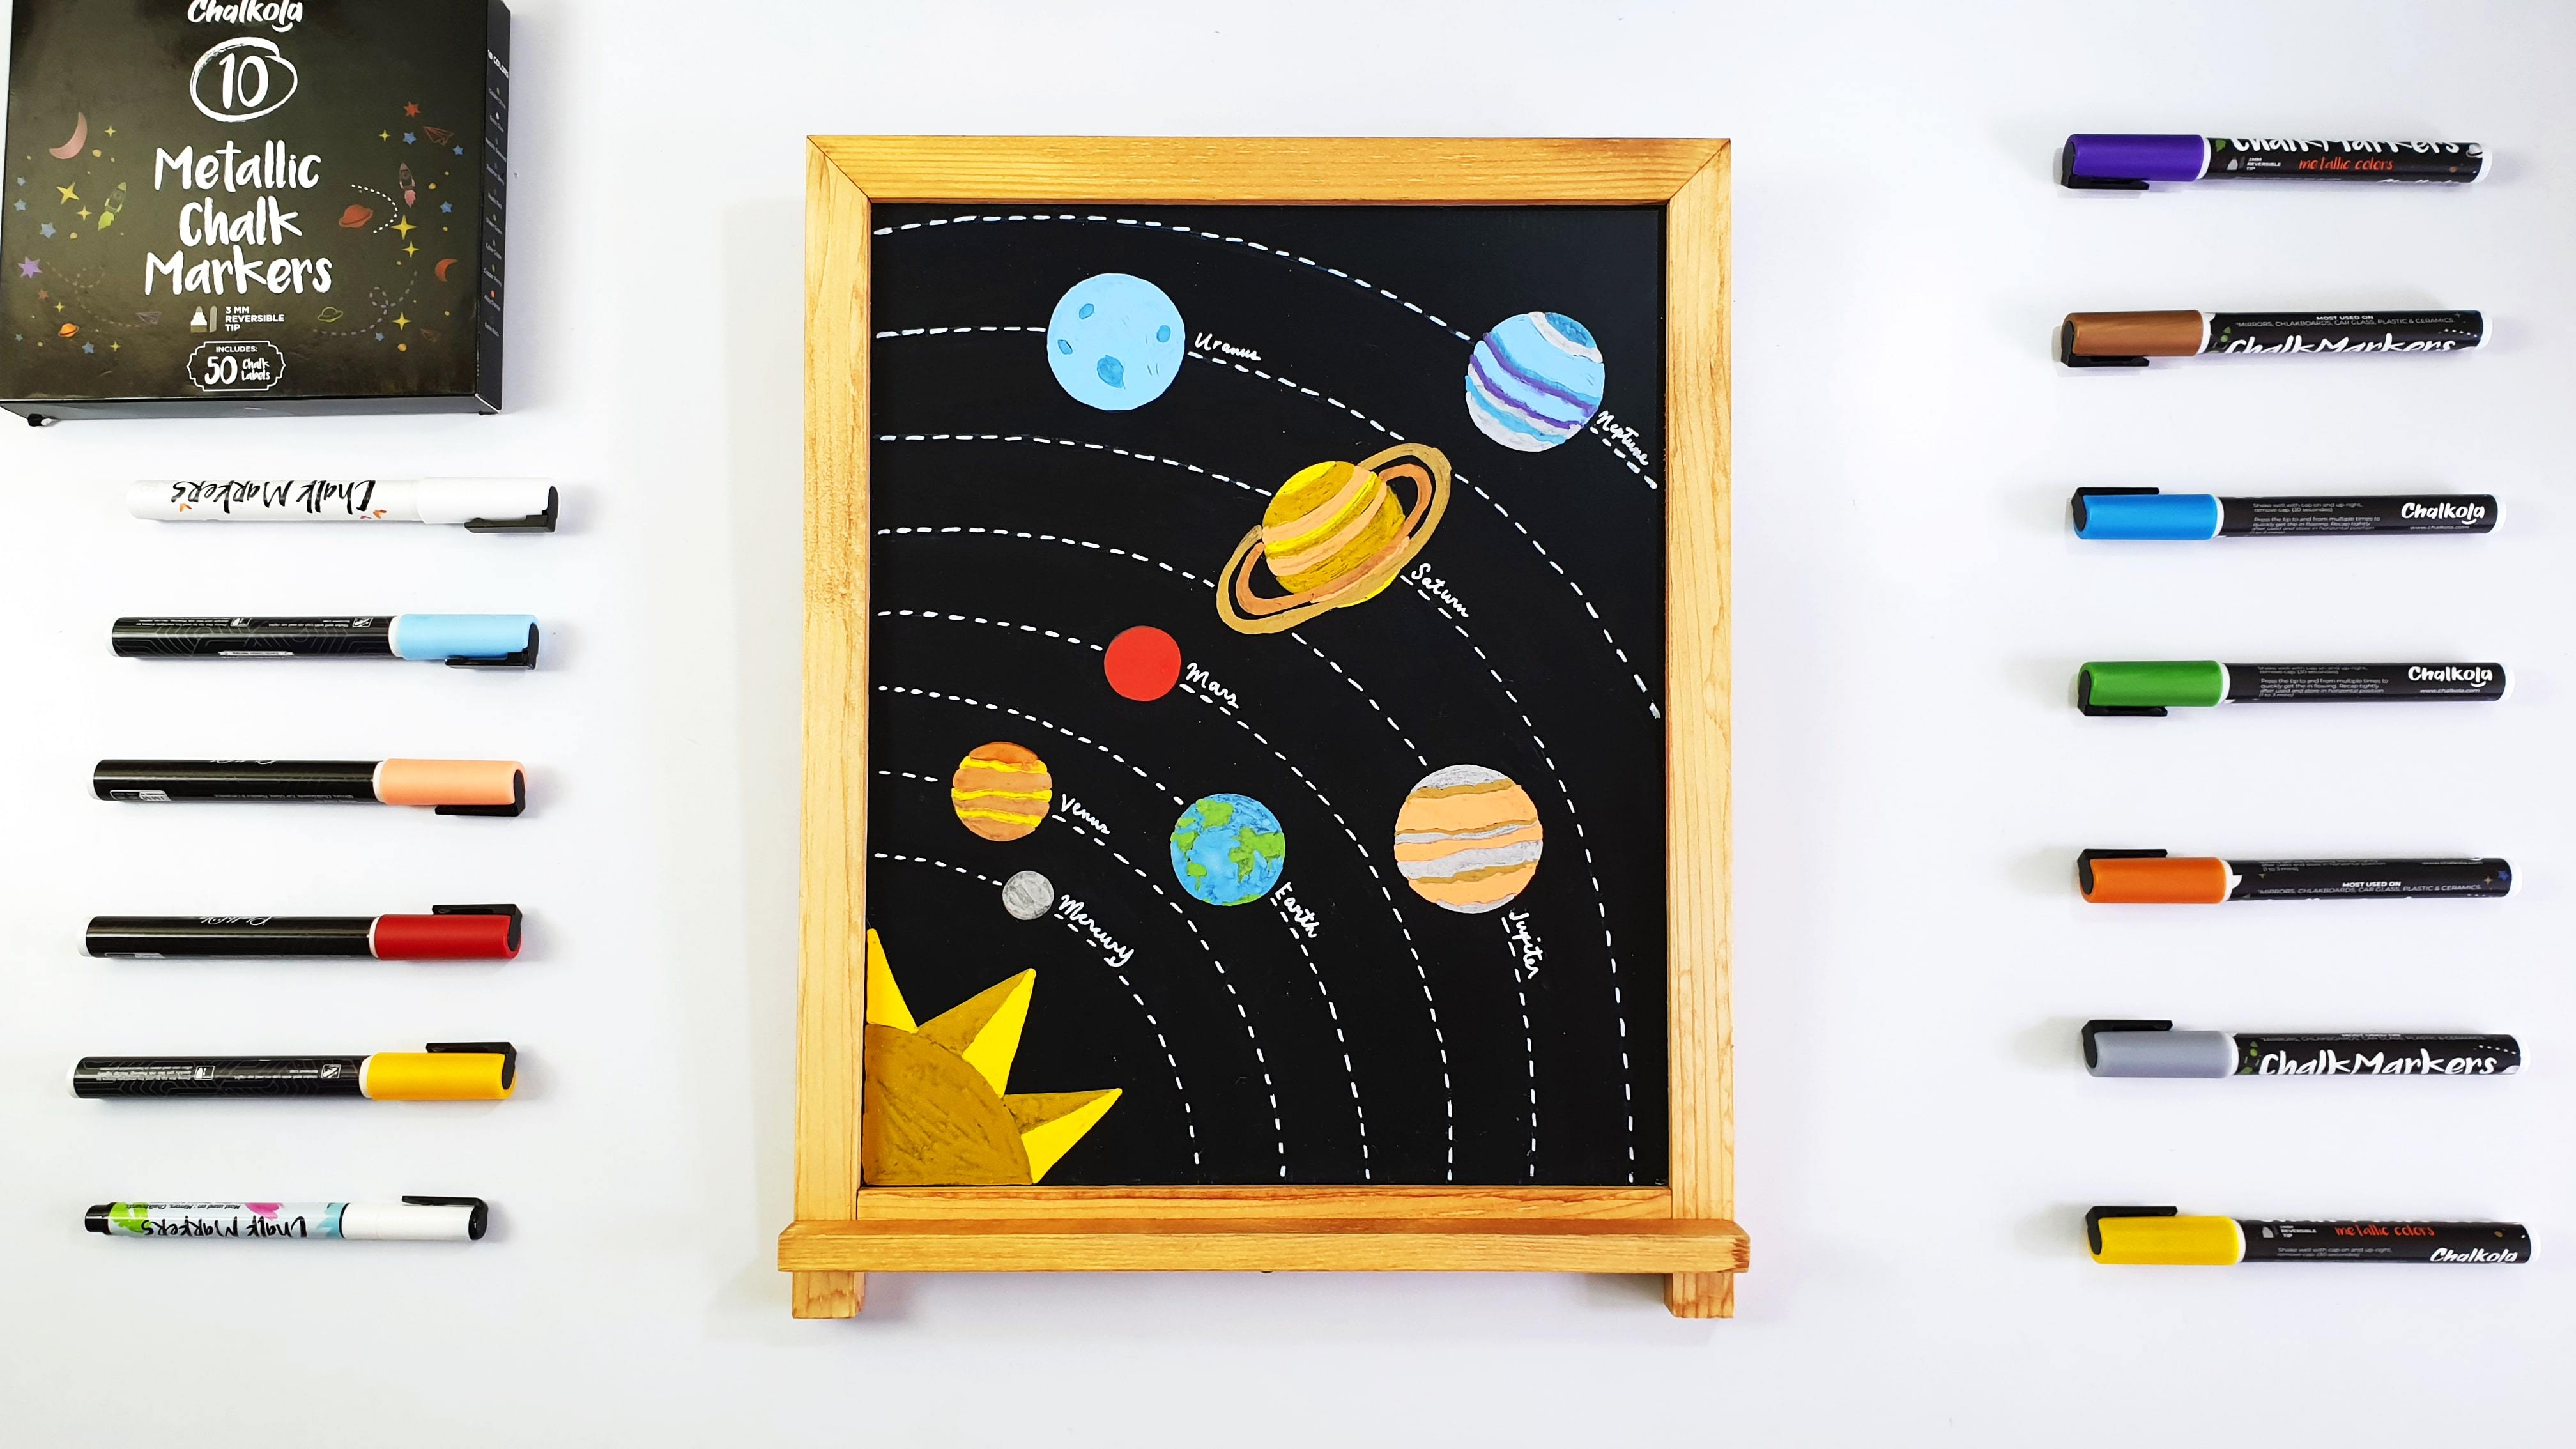 the solar system drawing